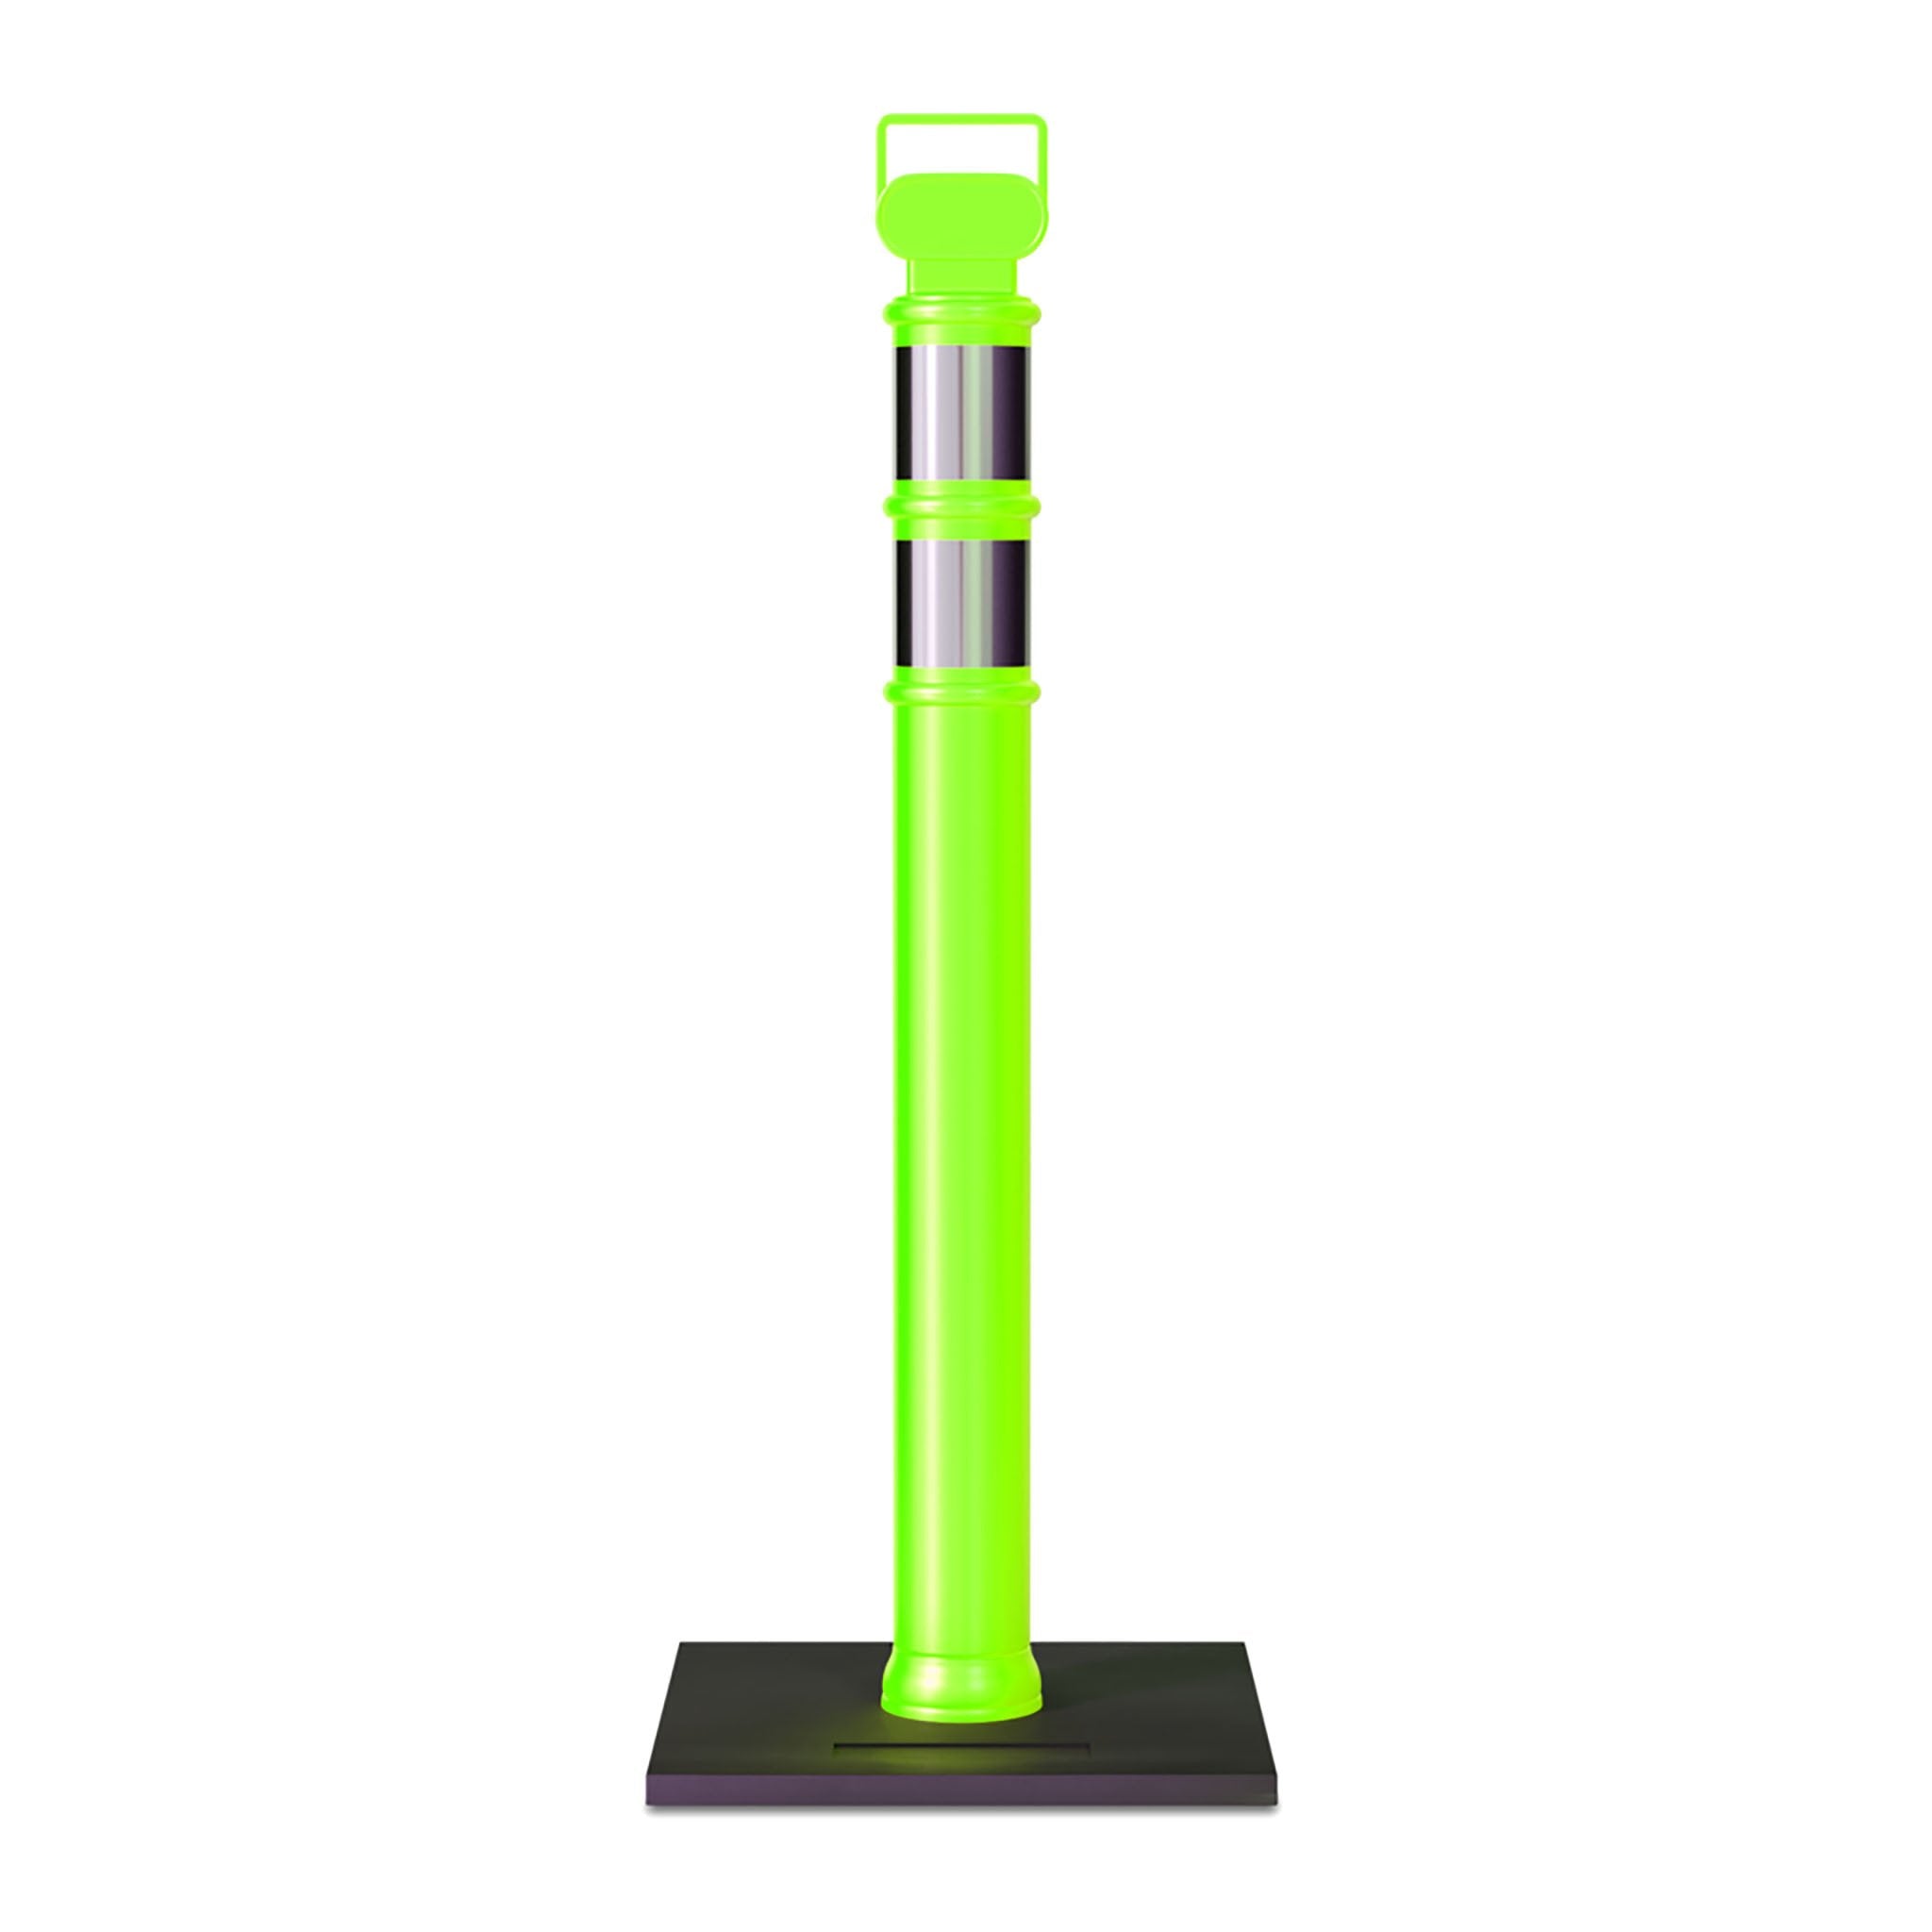 Delineator Post with Base, 45 in. - Trafford Industrial - Crowd Control